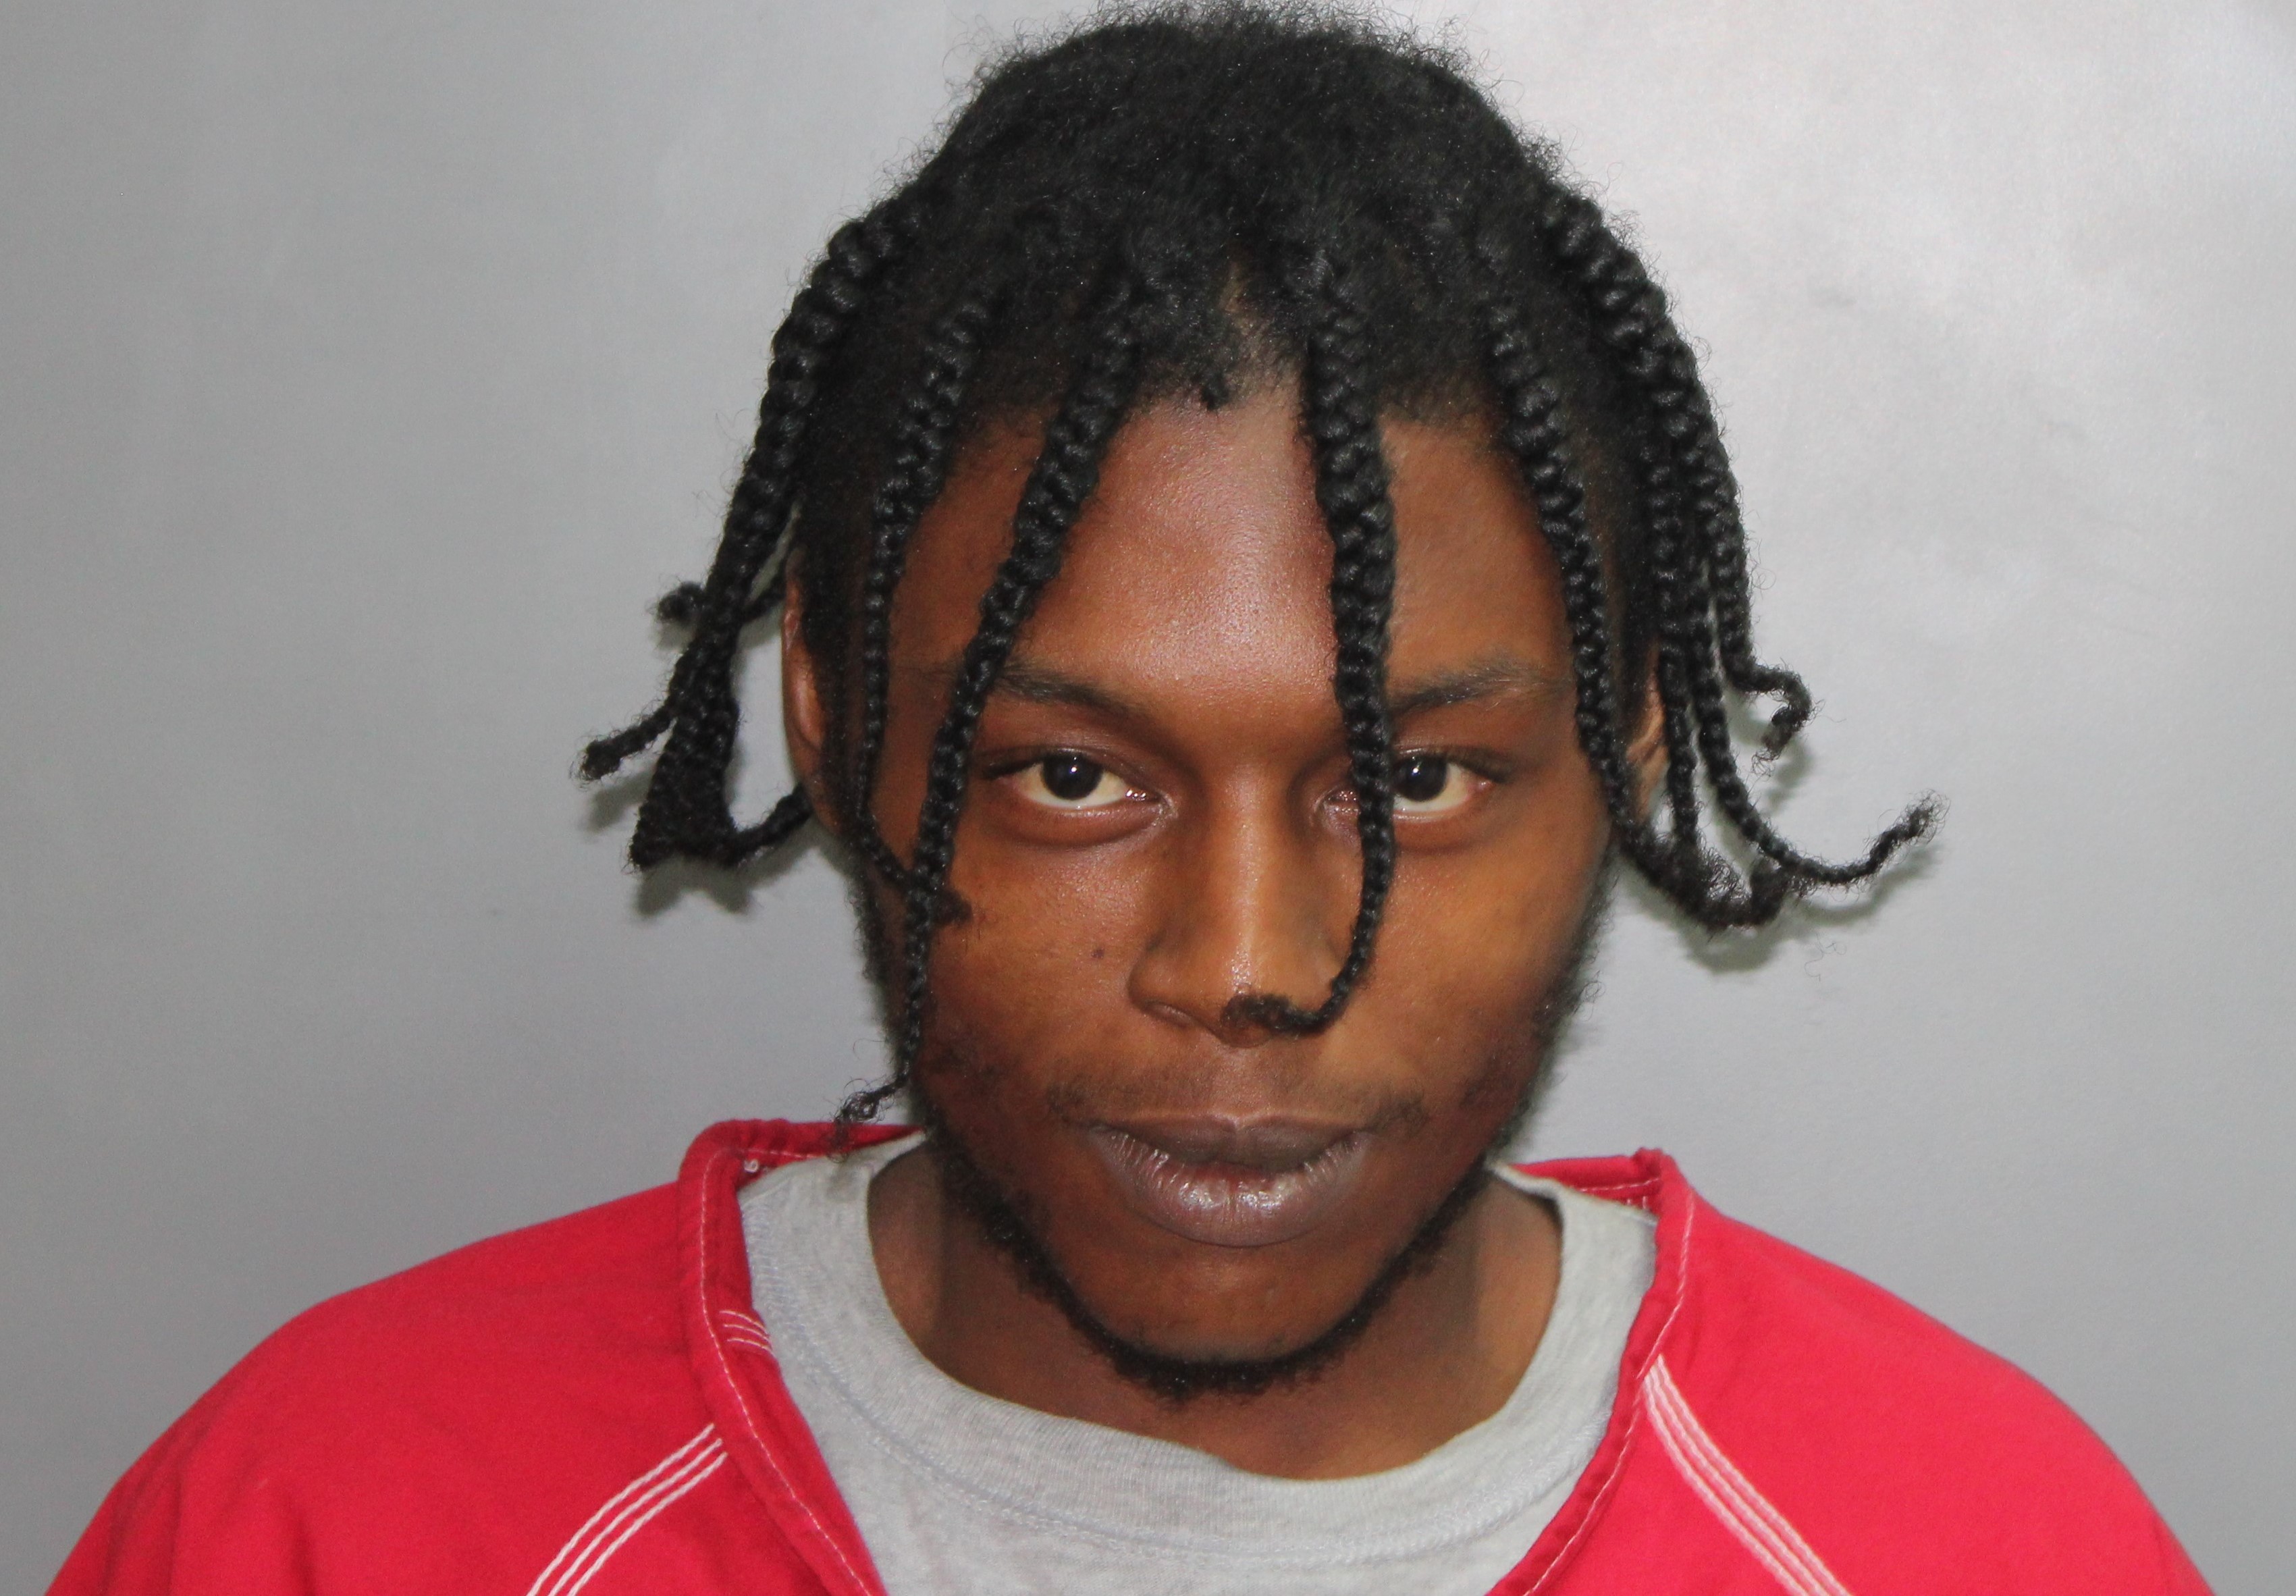 REPEAT OFFENDER: St. Croix's Dequan J.J. Forde Arrested For Gunpoint Robbery in May